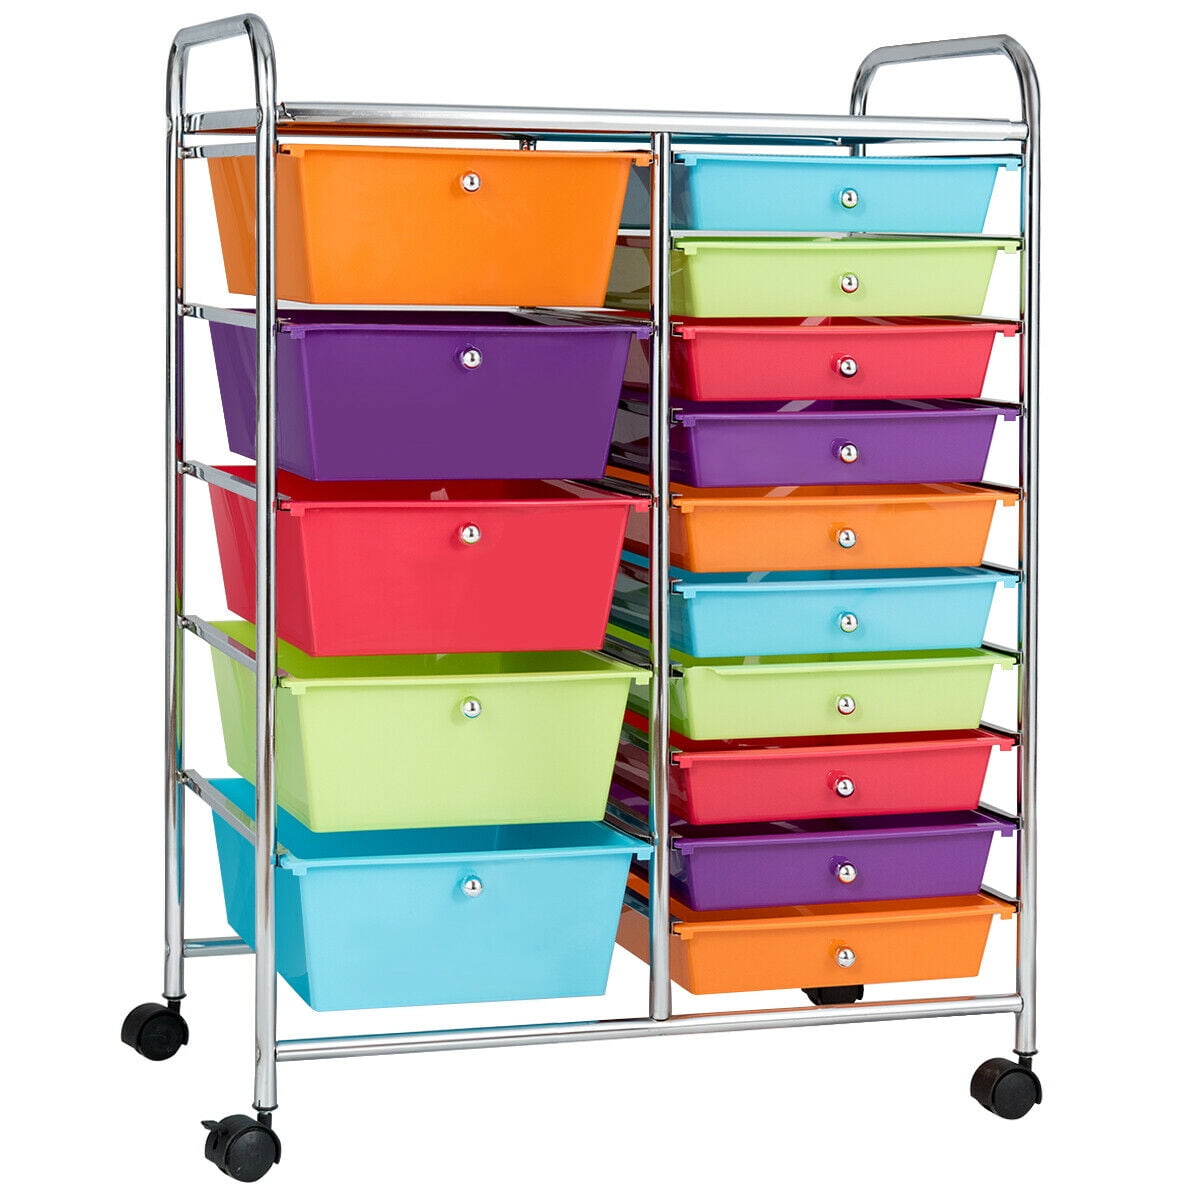 Portable 15 Drawers Cabinet Makeup Storage Trolley Wheels Cart Home Office Salon